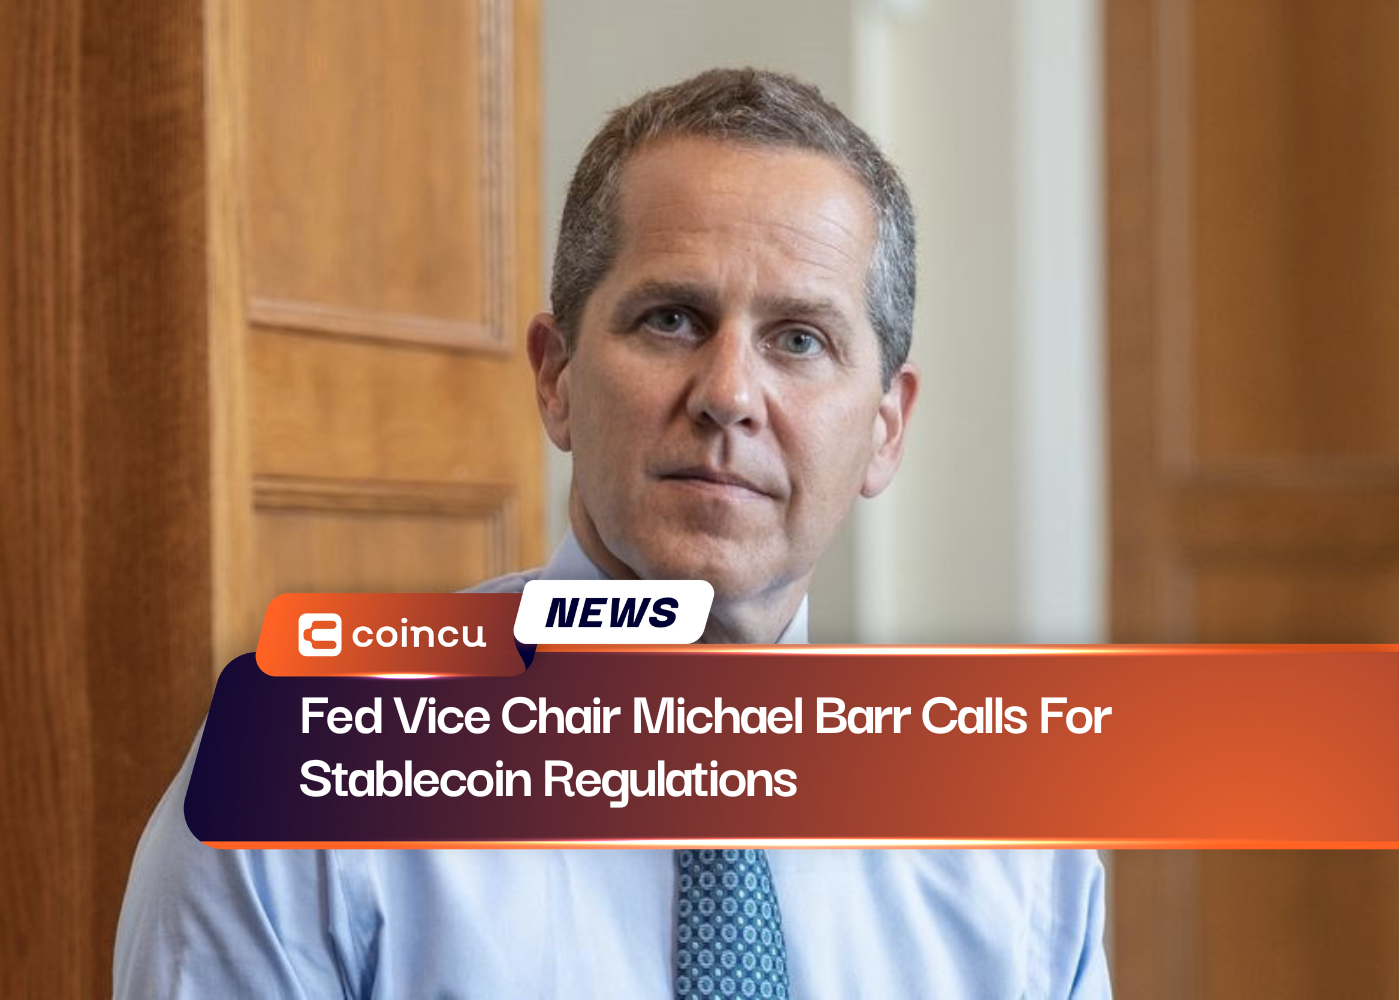 Fed Vice Chair Michael Barr Calls For Stablecoin Regulations